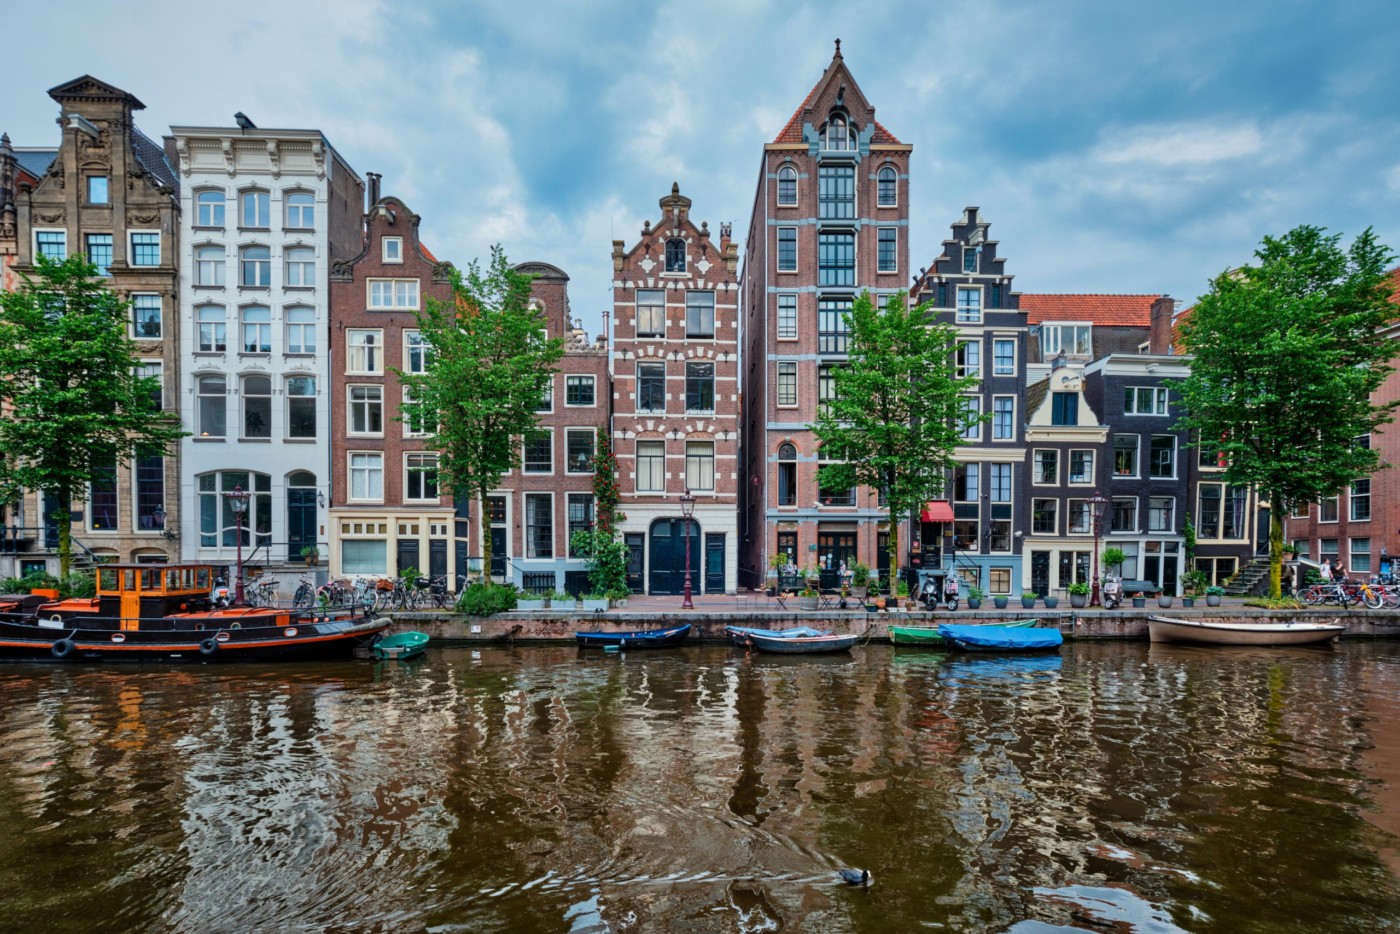 Singel canal in Amsterdam with old houses. Amsterdam, Netherlands